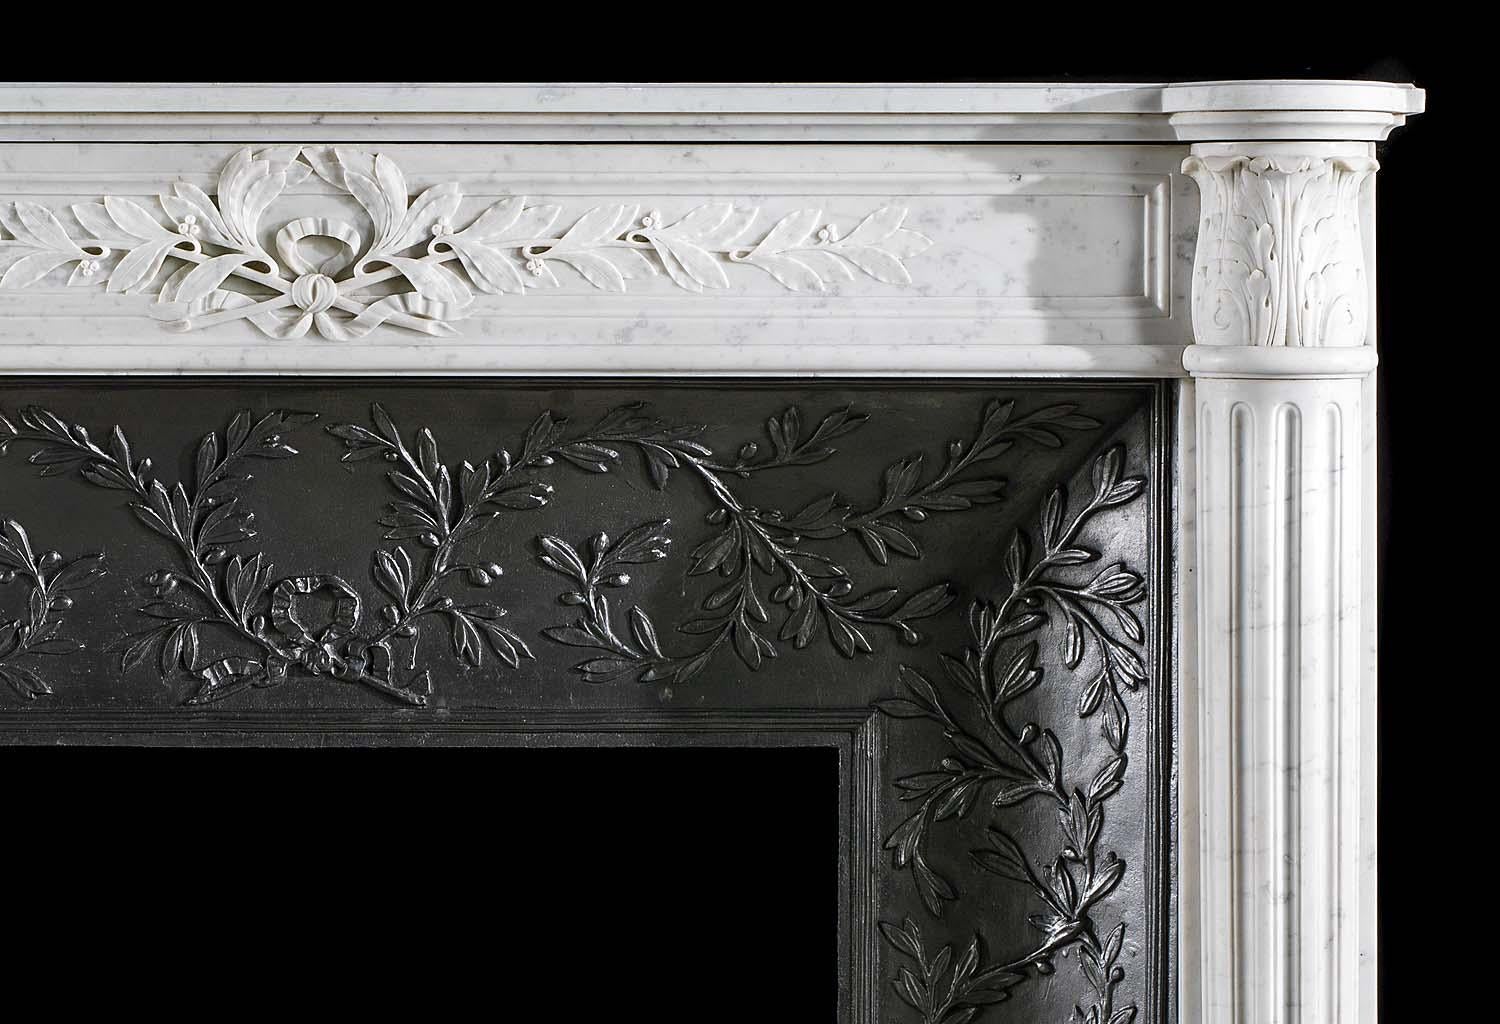 A small French Carrara marble antique fireplace surround in the Louis XVI style with its original ornate cast iron insert. The frieze, centred by a finely carved laurel wreath trailing sprays of laurel to ether side, is flanked by acanthus adorned